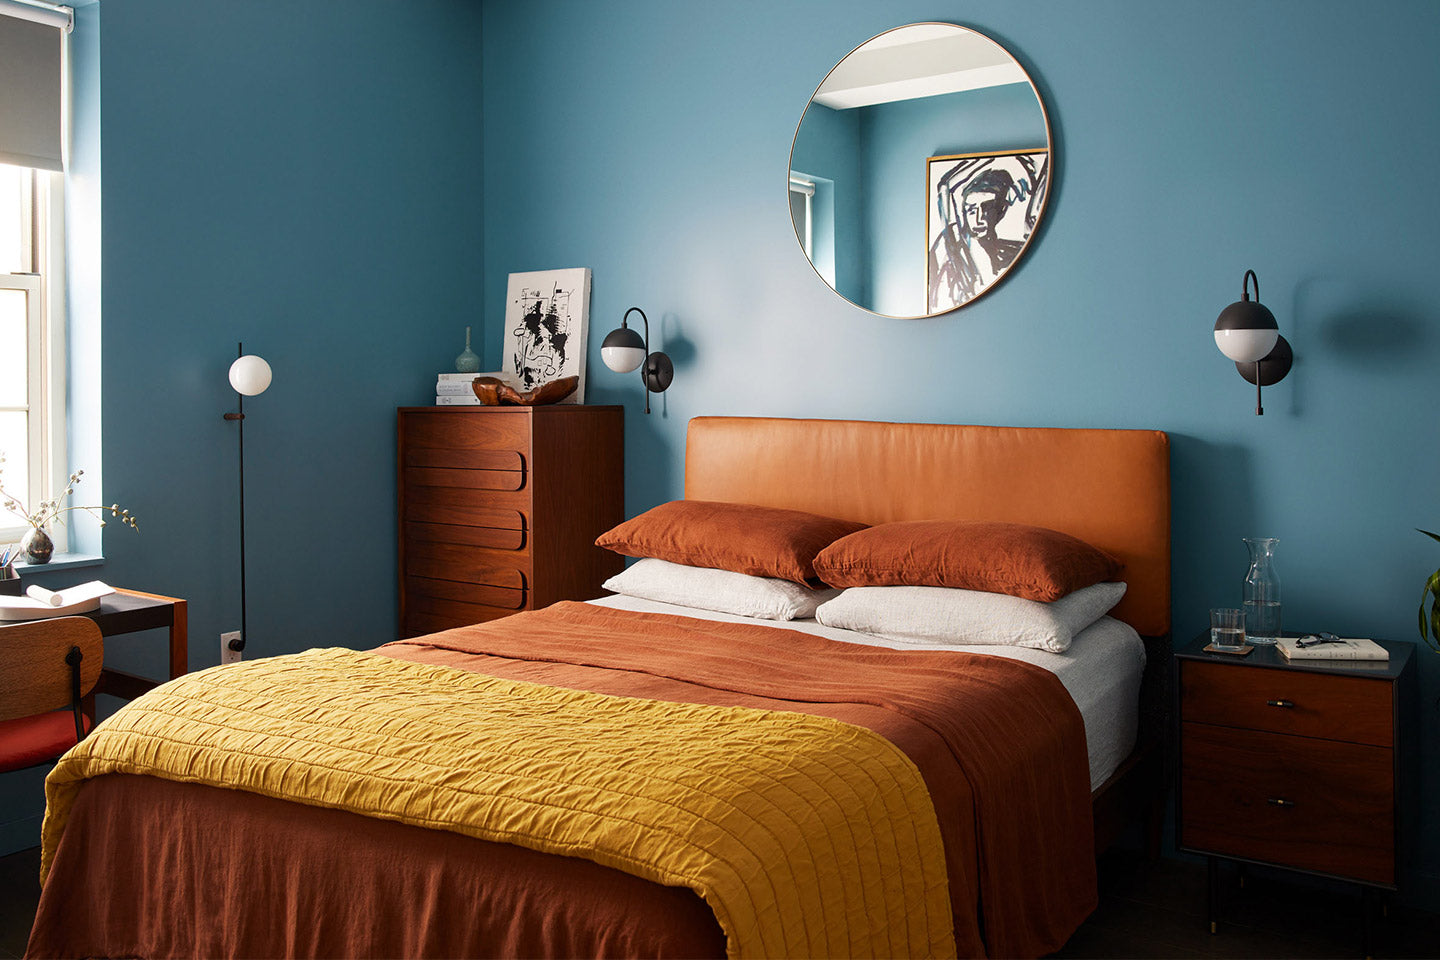 Bedroom paint colors like Blue Ivy bring a sense of calm to the space.